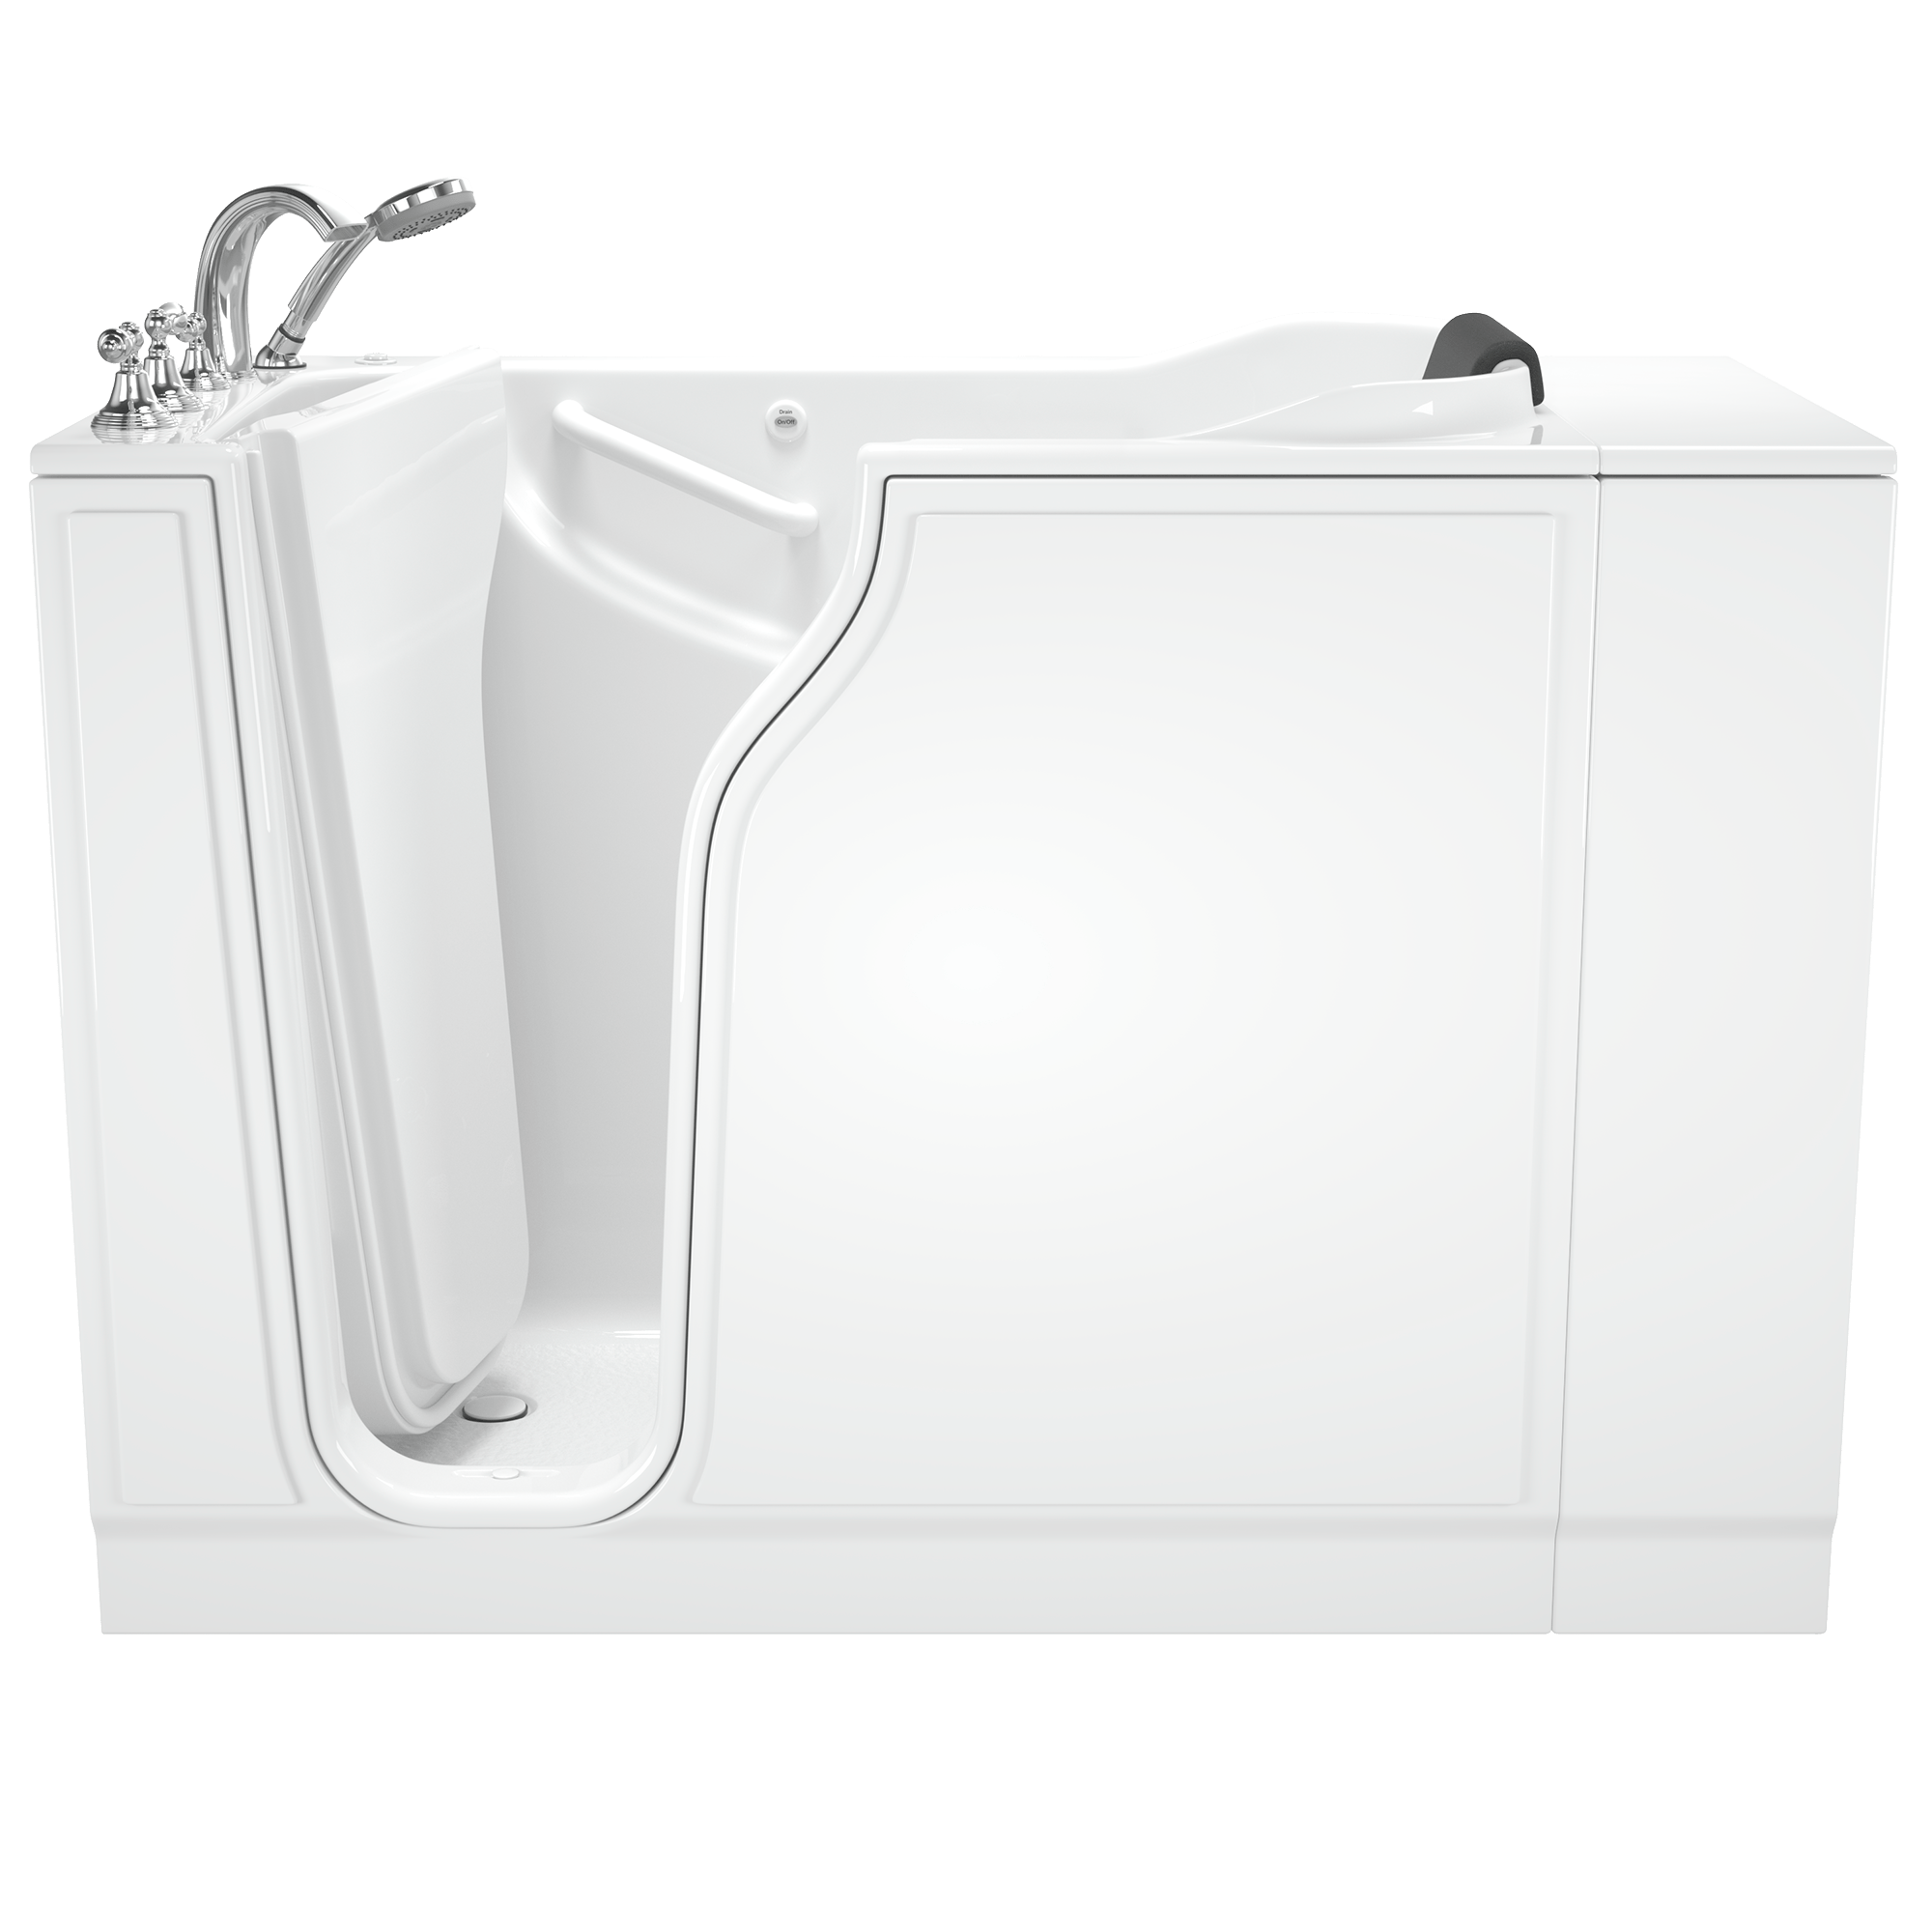 Gelcoat Premium Series 30 x 52 -Inch Walk-in Tub With Whirlpool System - Left-Hand Drain With Faucet